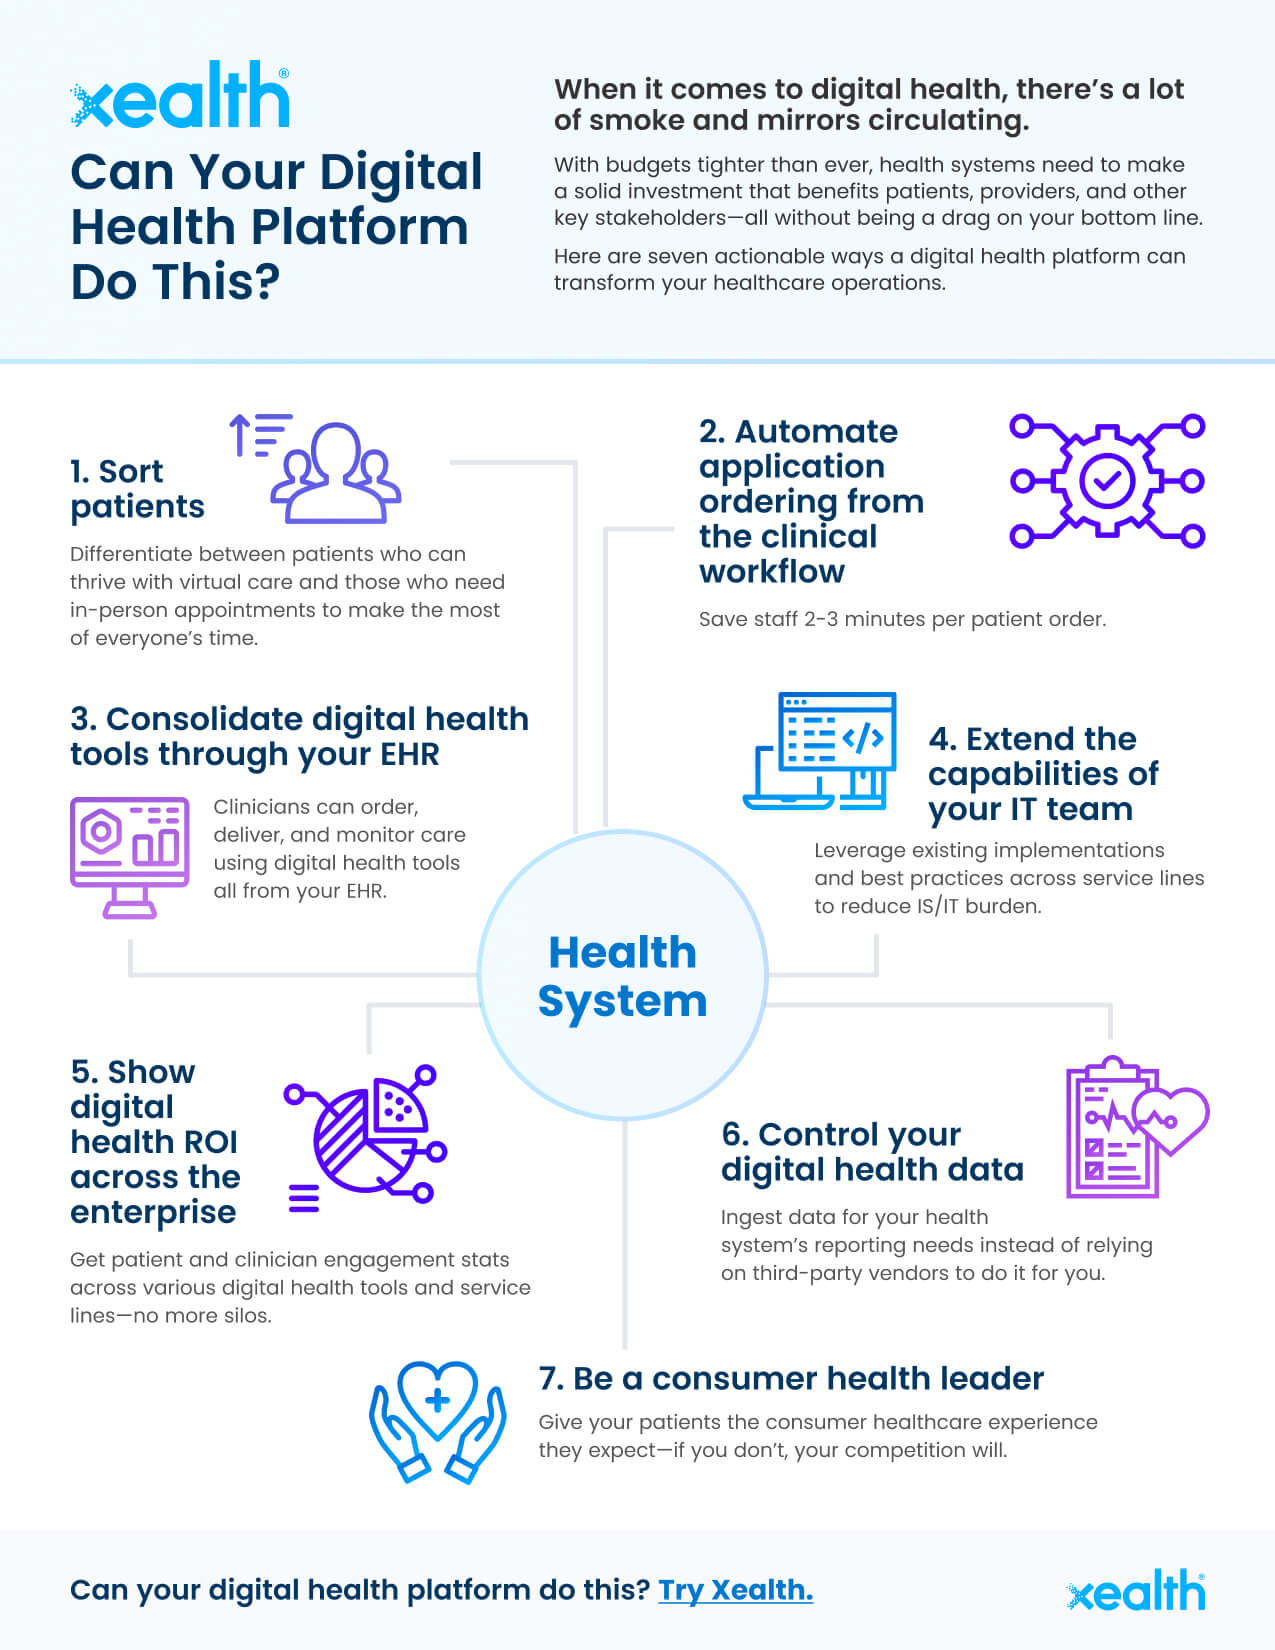 Can Your Digital Health Platform Do This?